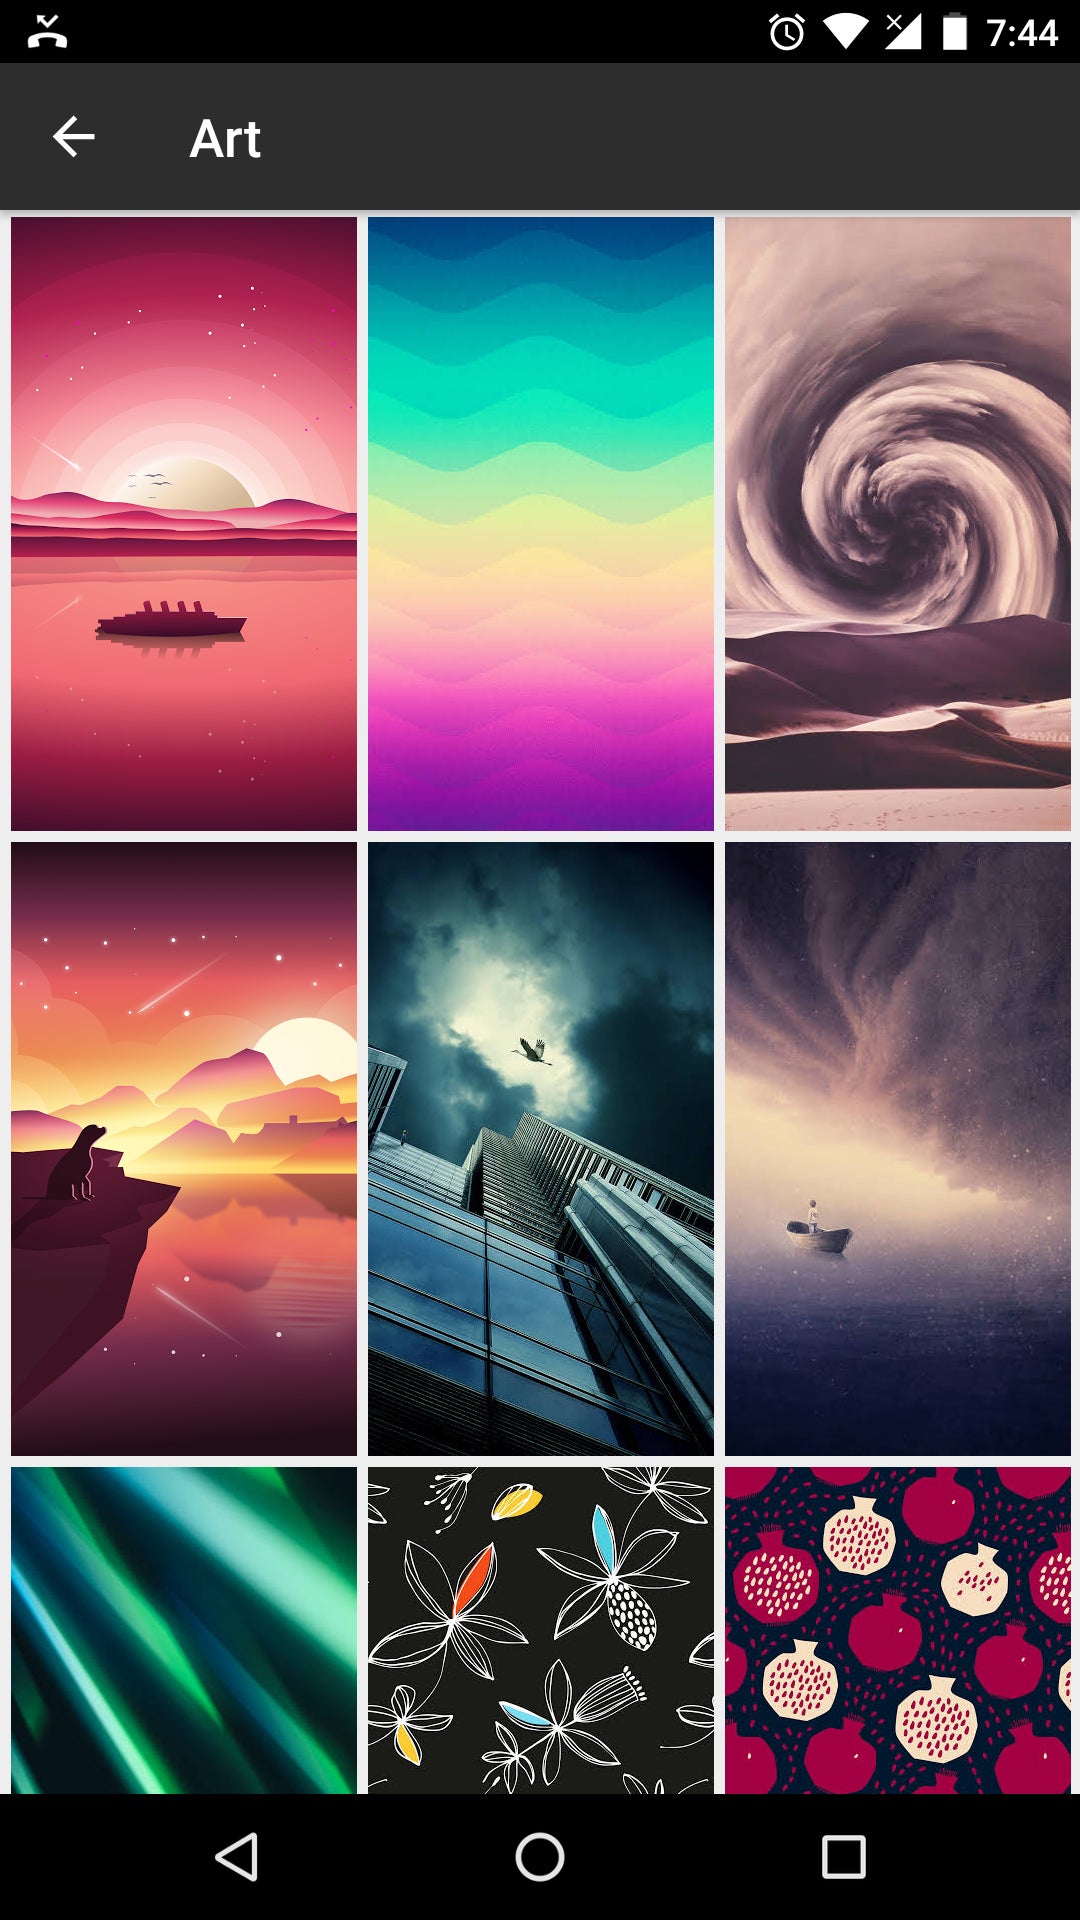 Google Wallpapers now offers new